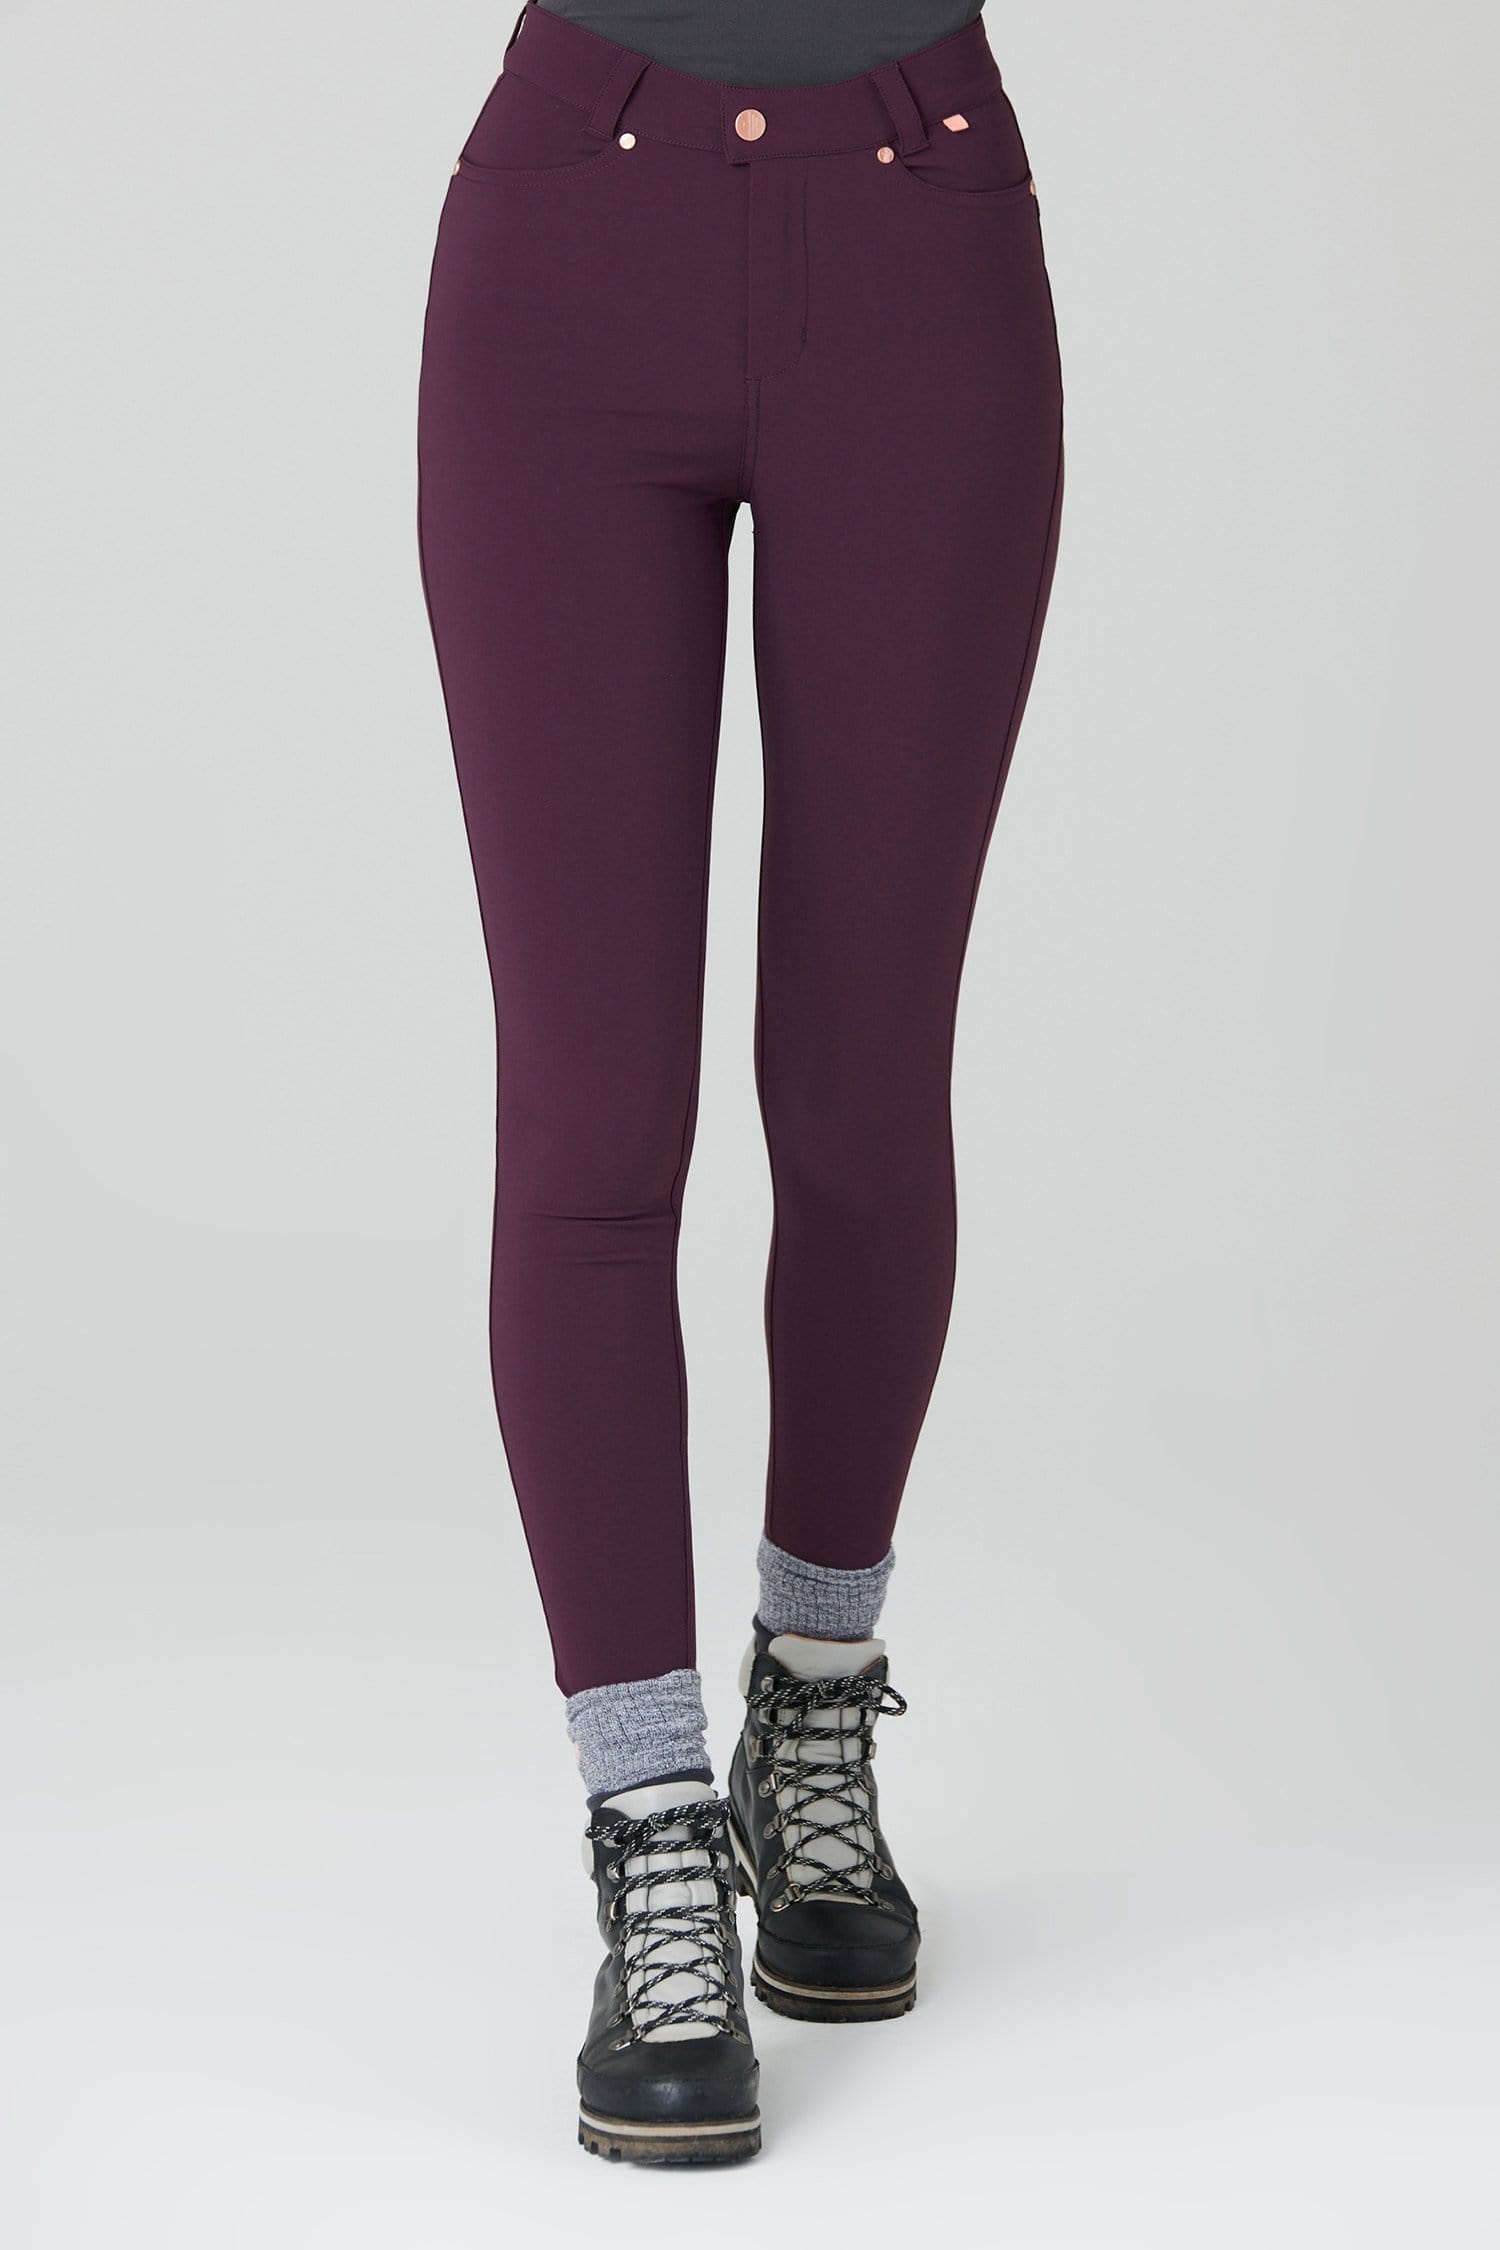 Max Stretch Skinny Outdoor Trousers - Aubergine - 28p / Uk10 - Womens - Acai Outdoorwear